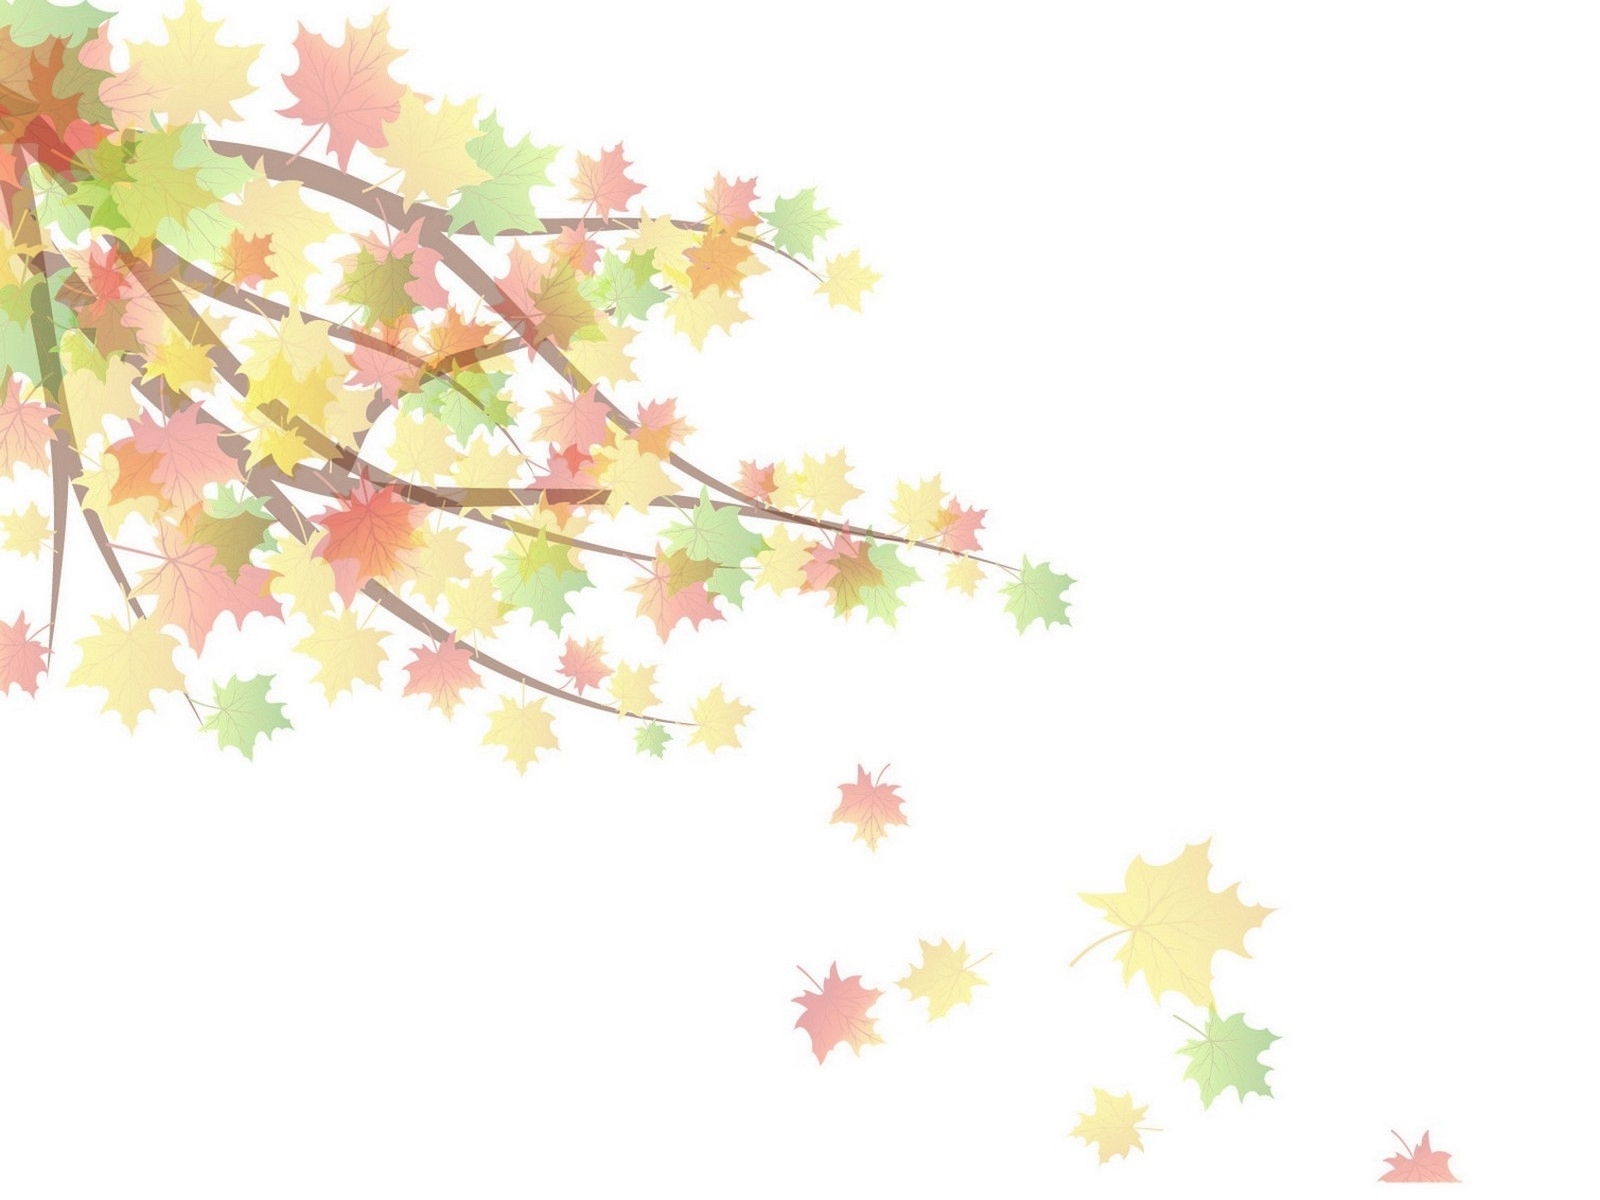 Autumn Period Ppt Backgrounds, Autumn Period Ppt Photos, Autumn Period In Free Fall Powerpoint Templates